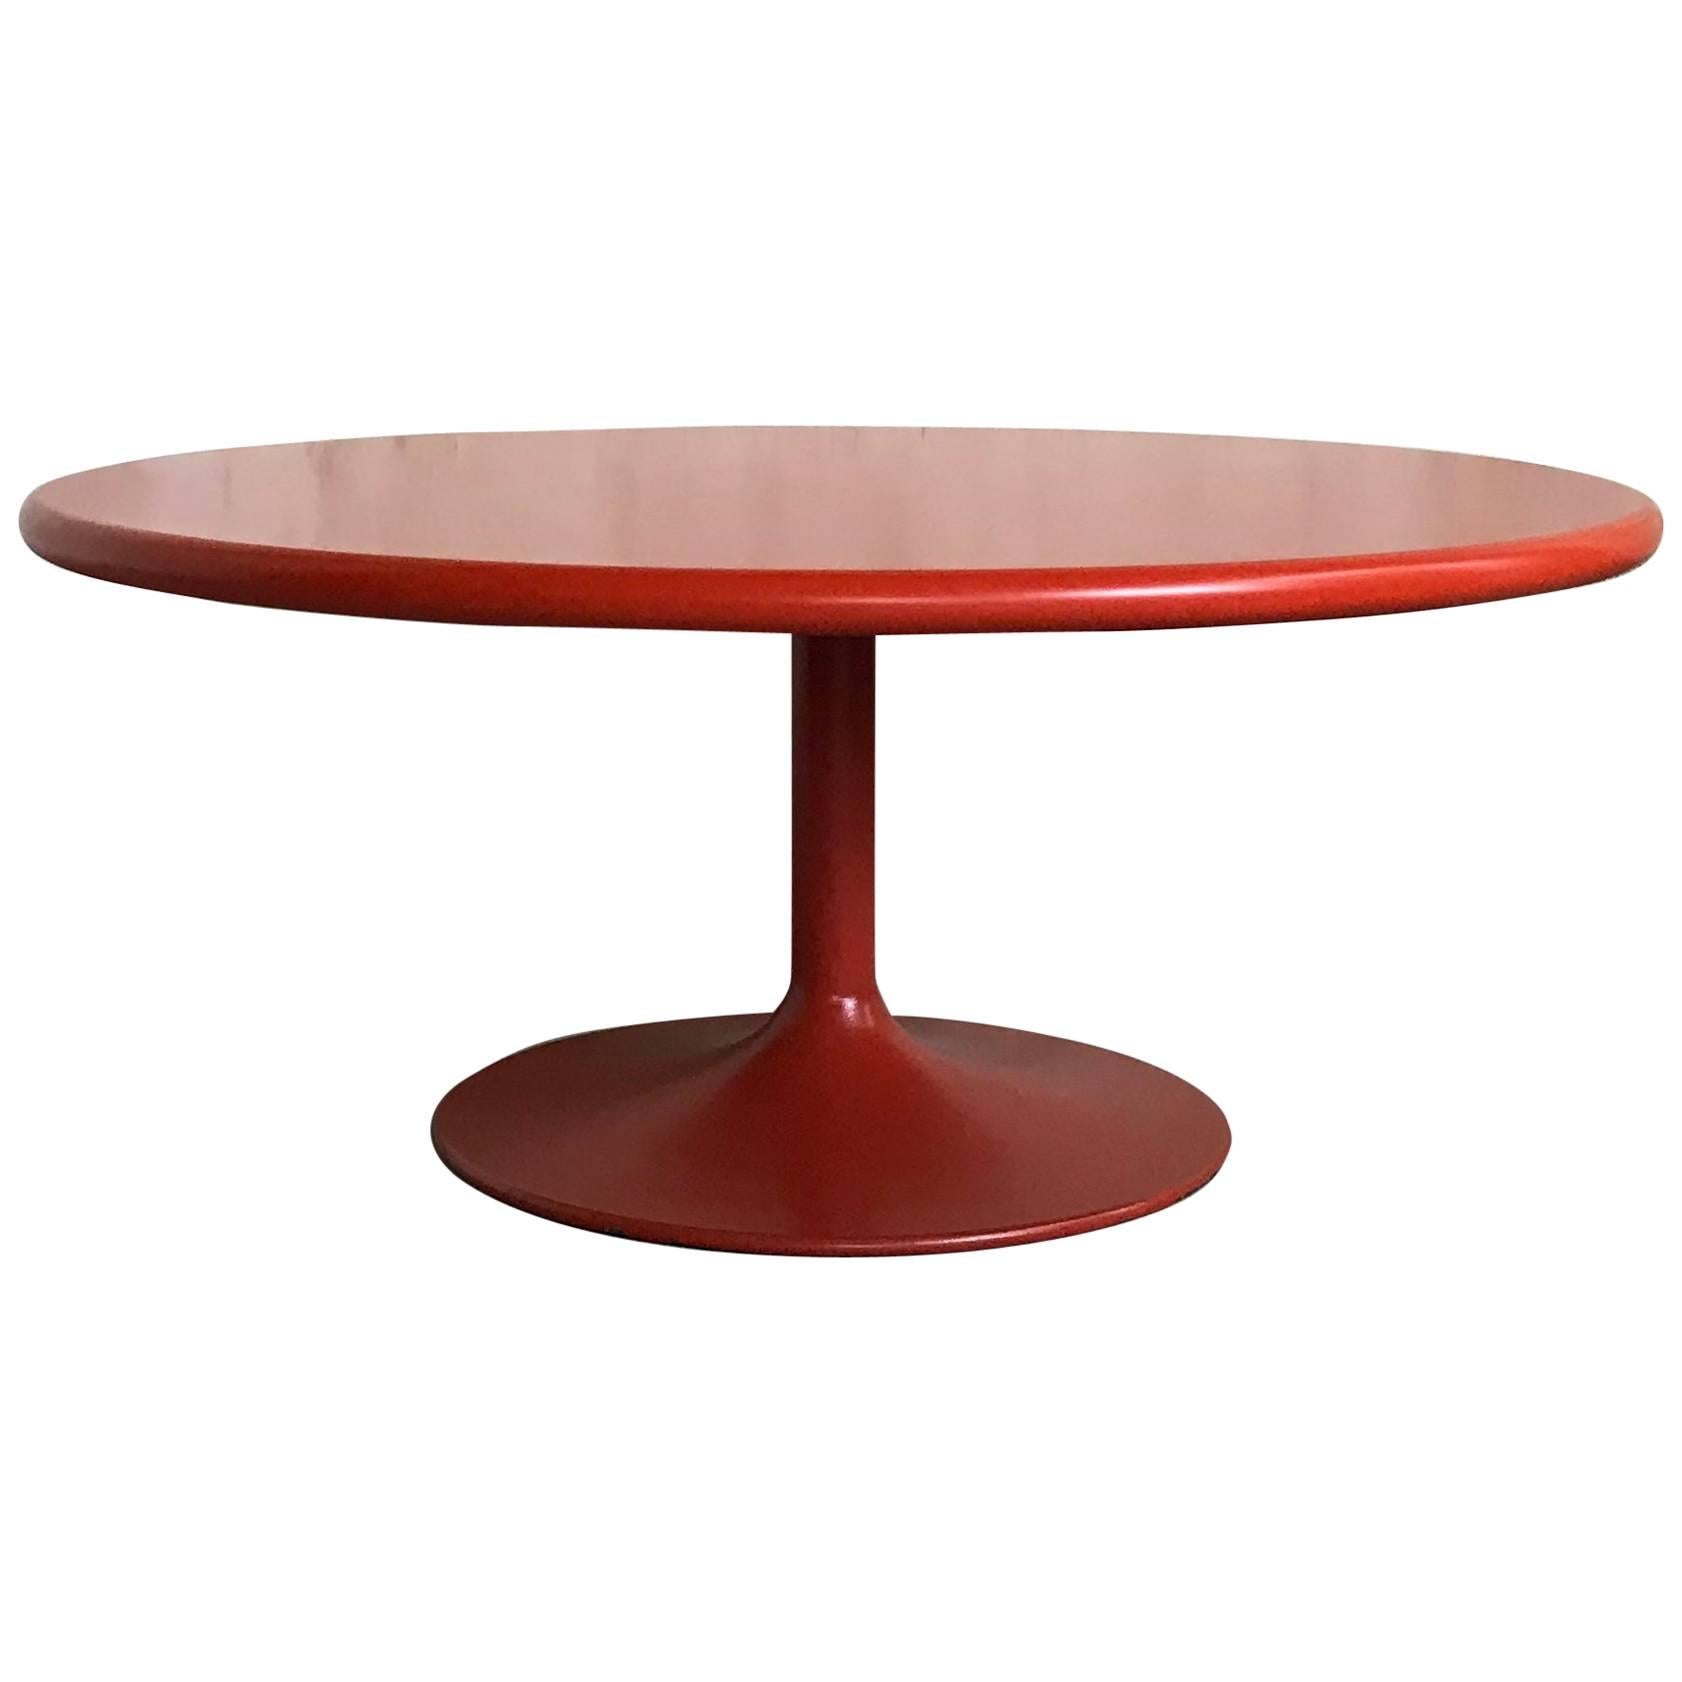 Original Rare Vintage Coffee Table 'Circle' by Pierre Paulin for Artifort, 1960s